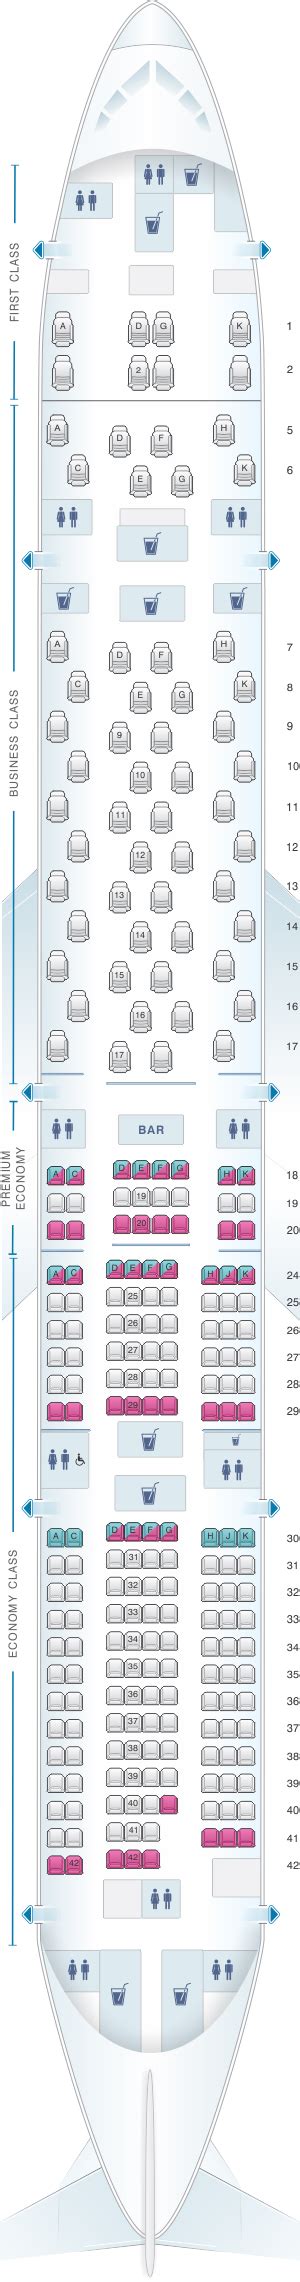 28 Boeing 777 300er Seat Map Maps Online For You